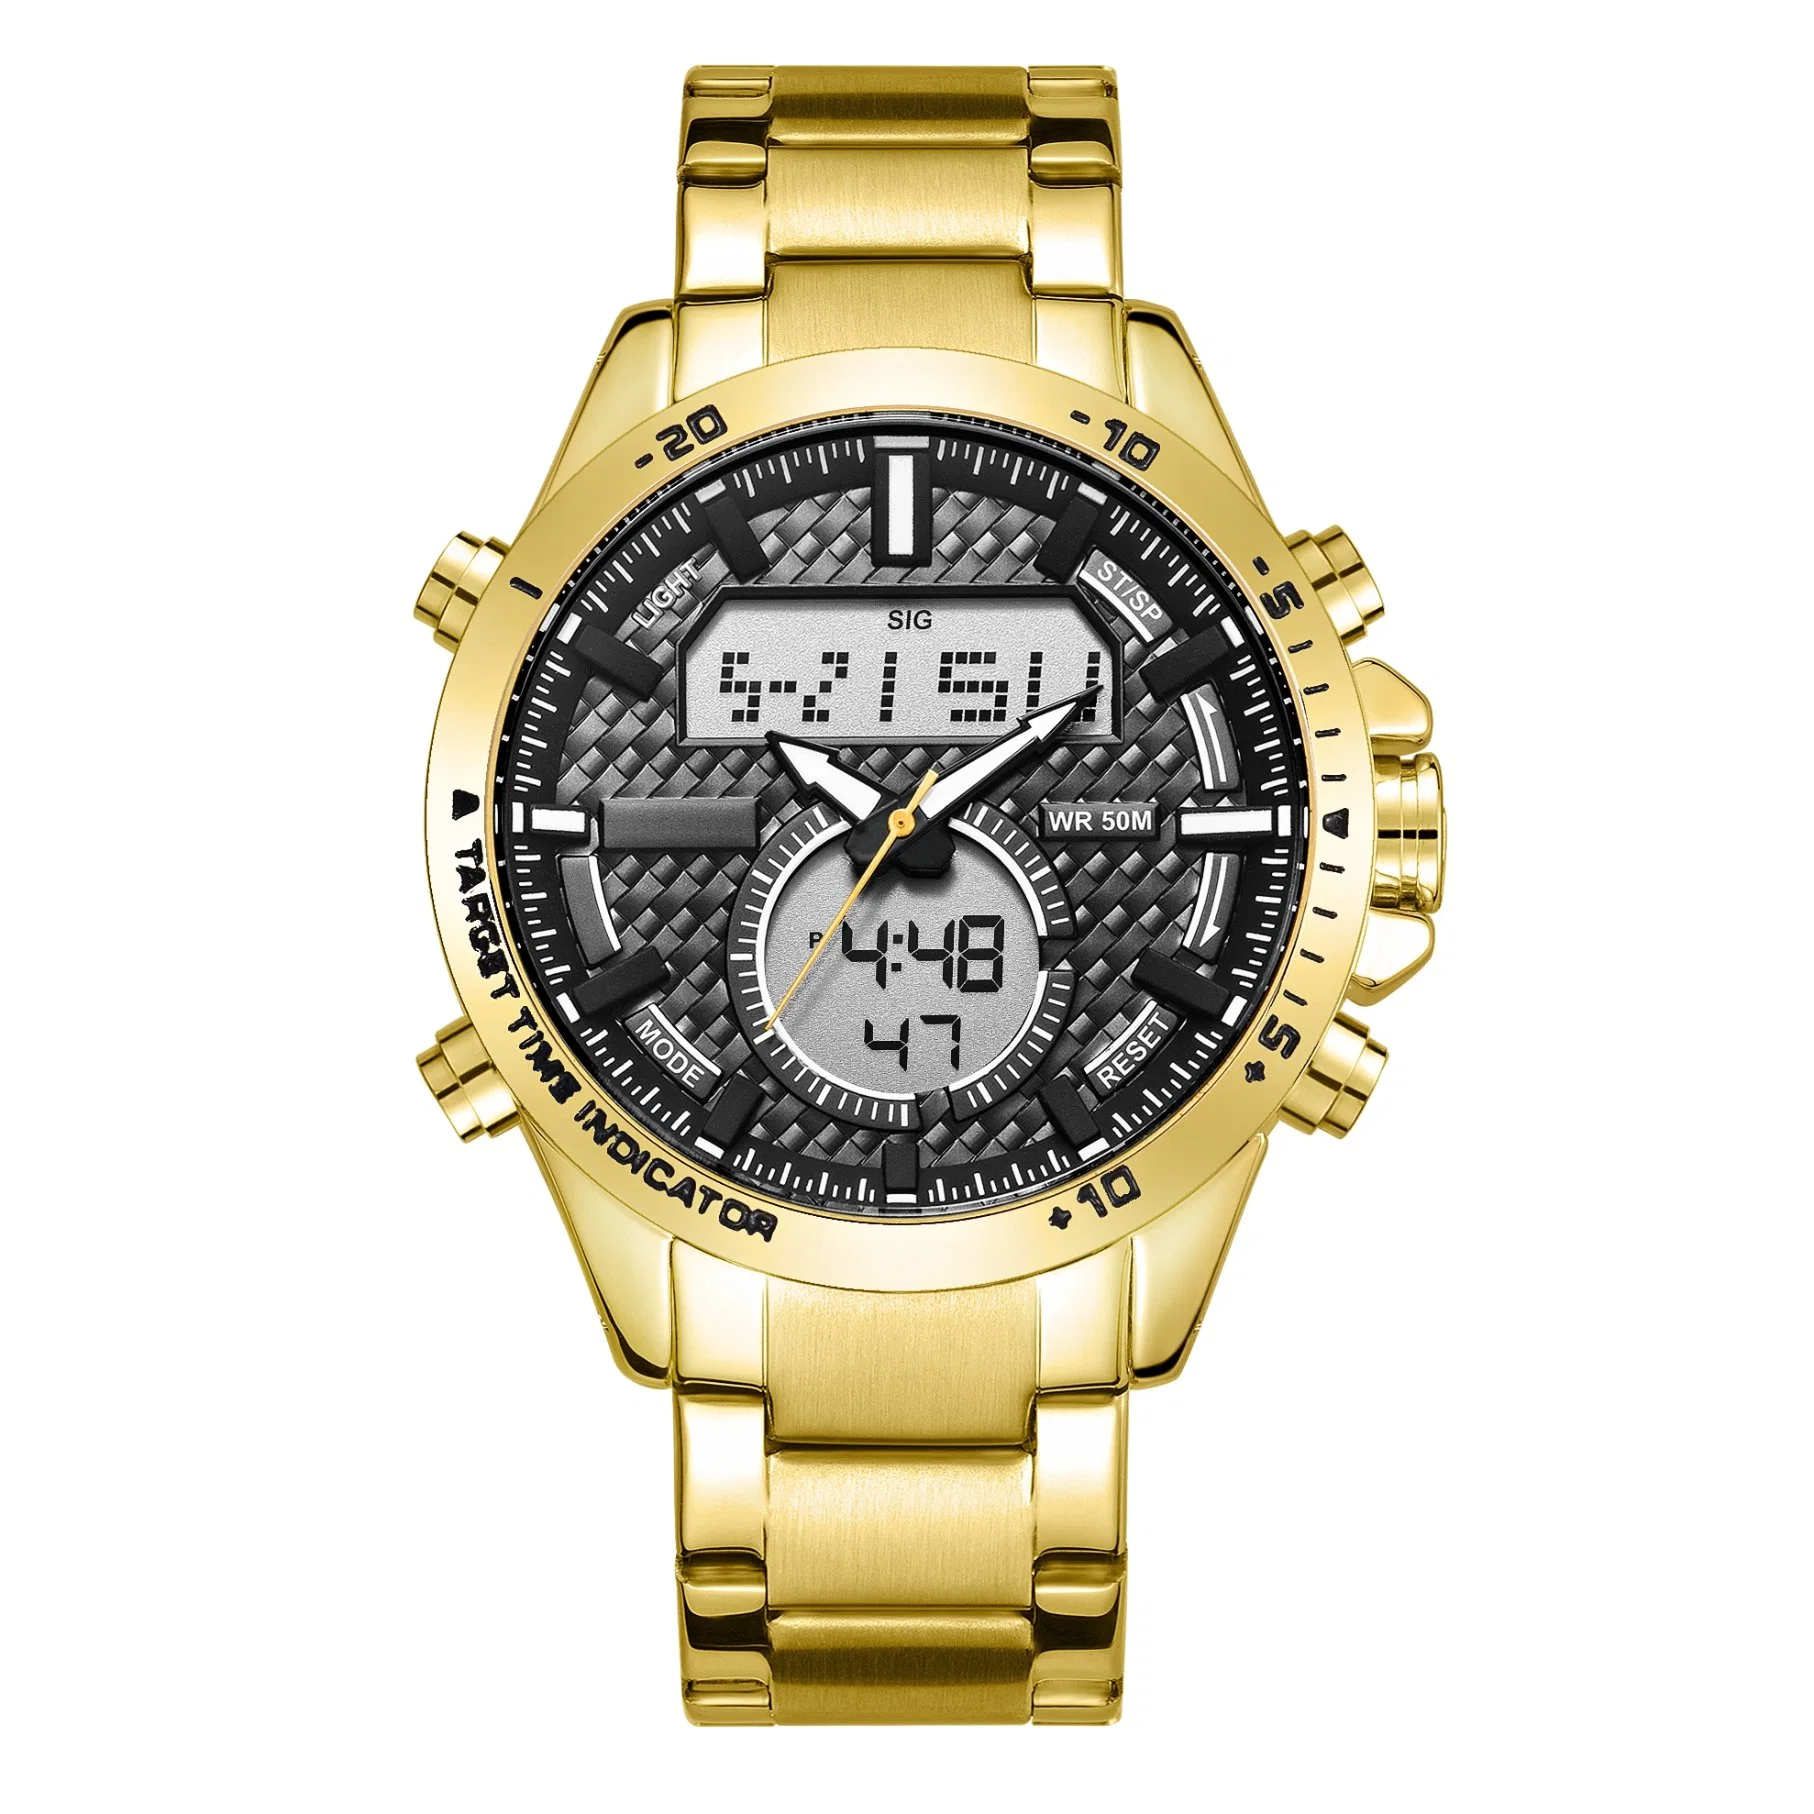 Analog-Digital Watch for Wrist Watch with Fashion Watch at China Watch in Stainless Steel Watch